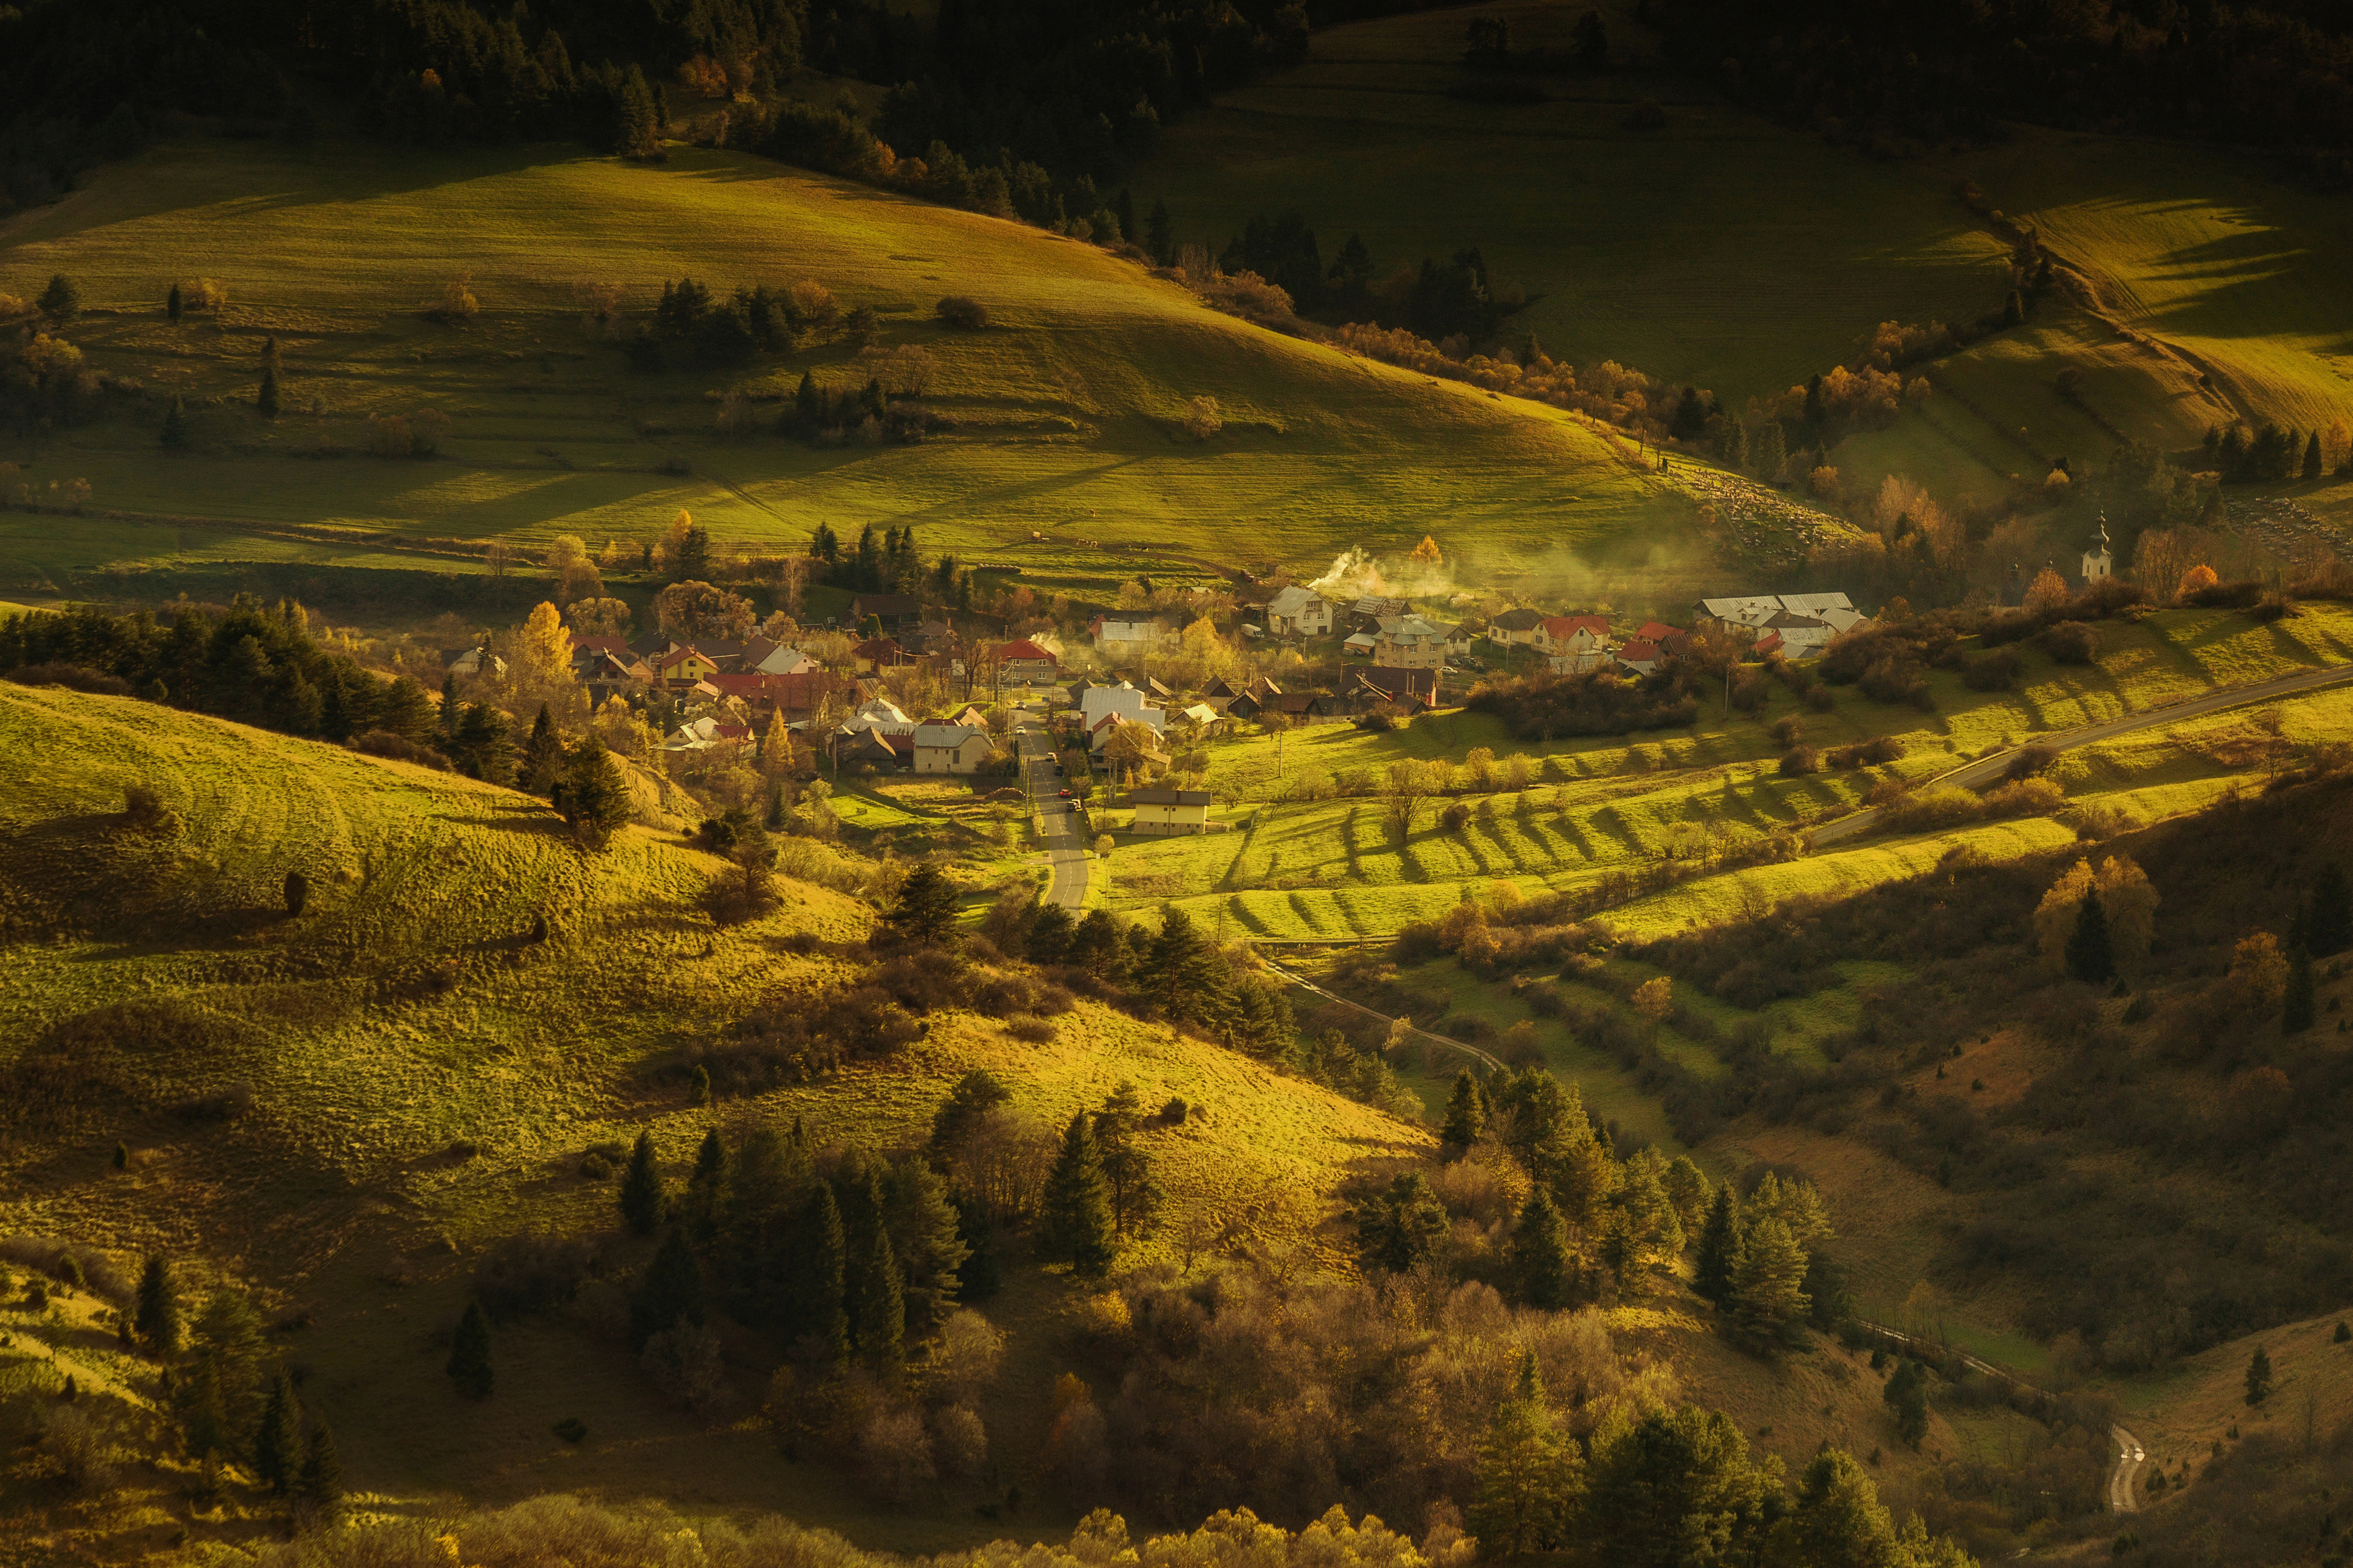 Horizontal, Photography, Landscape, Nature, Rural, Agricultural, Field, Hill, Tree, Sunlight, Agriculture, Mountain, Travel, Village, Rural, View, Pieniny, Slovakia, Landscape, Autumn, Damian Cyfka